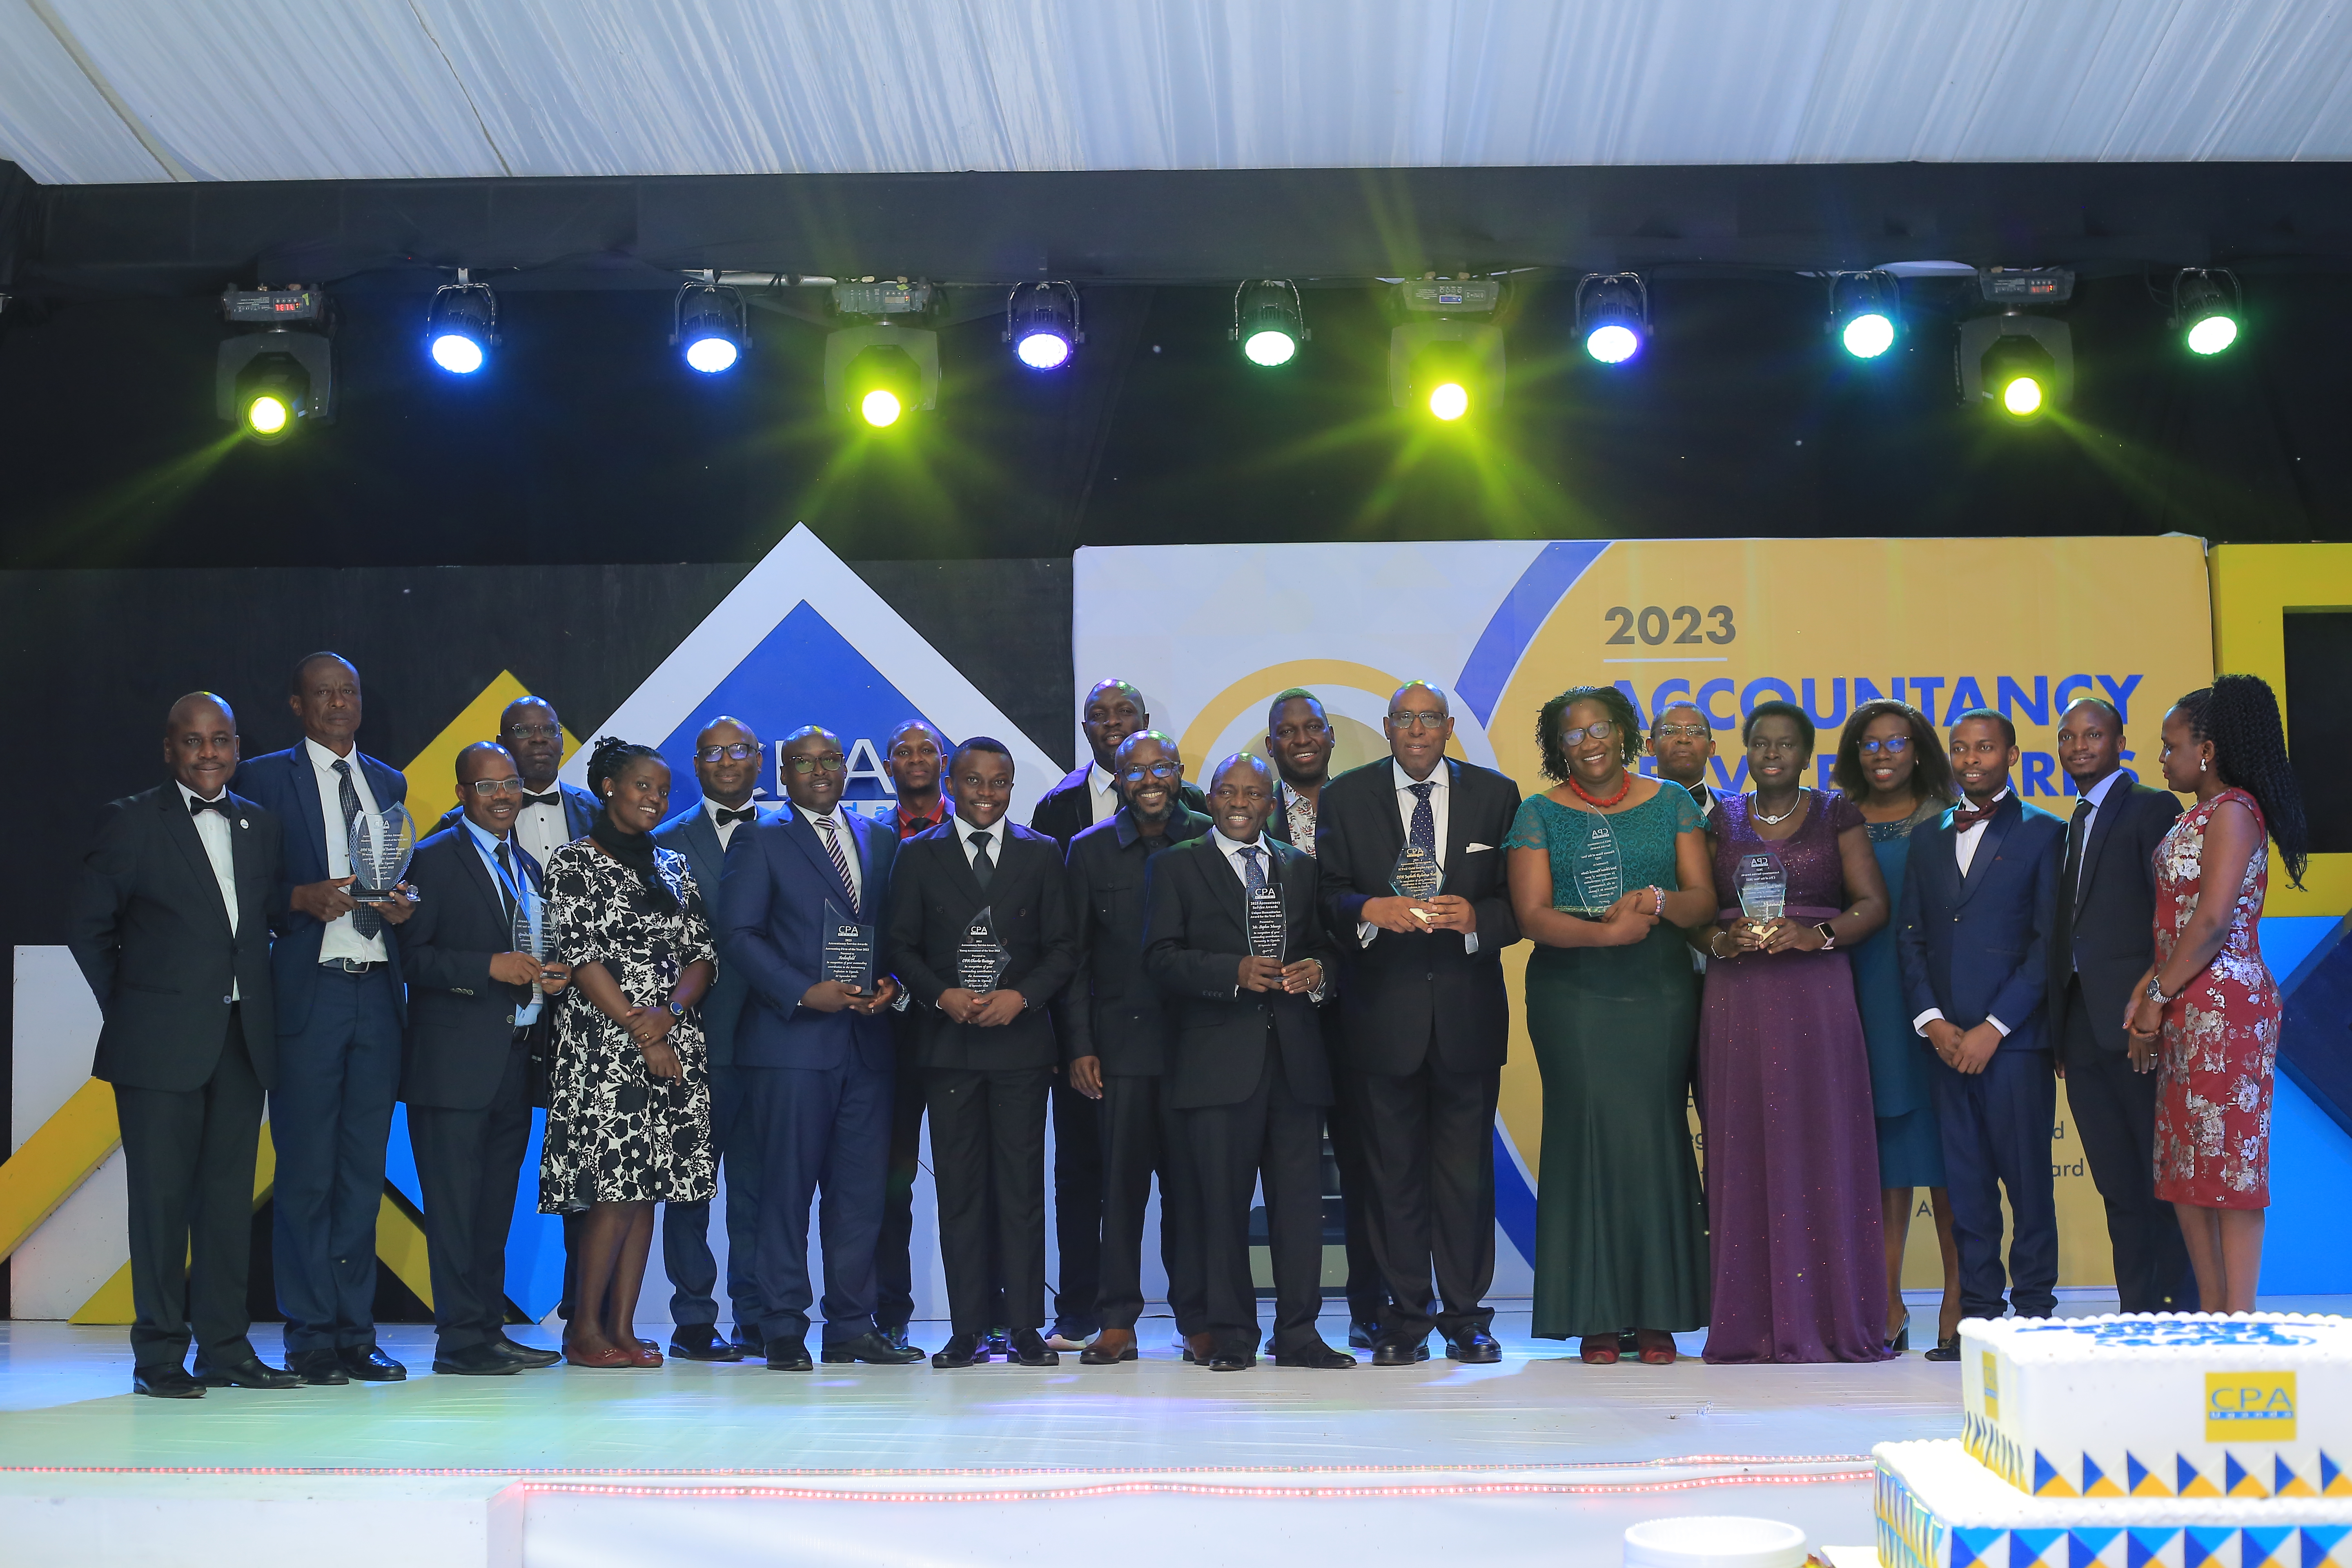 Winners of the 2023 Accountancy Service Awards pose for a group photo with iCPAU Council members